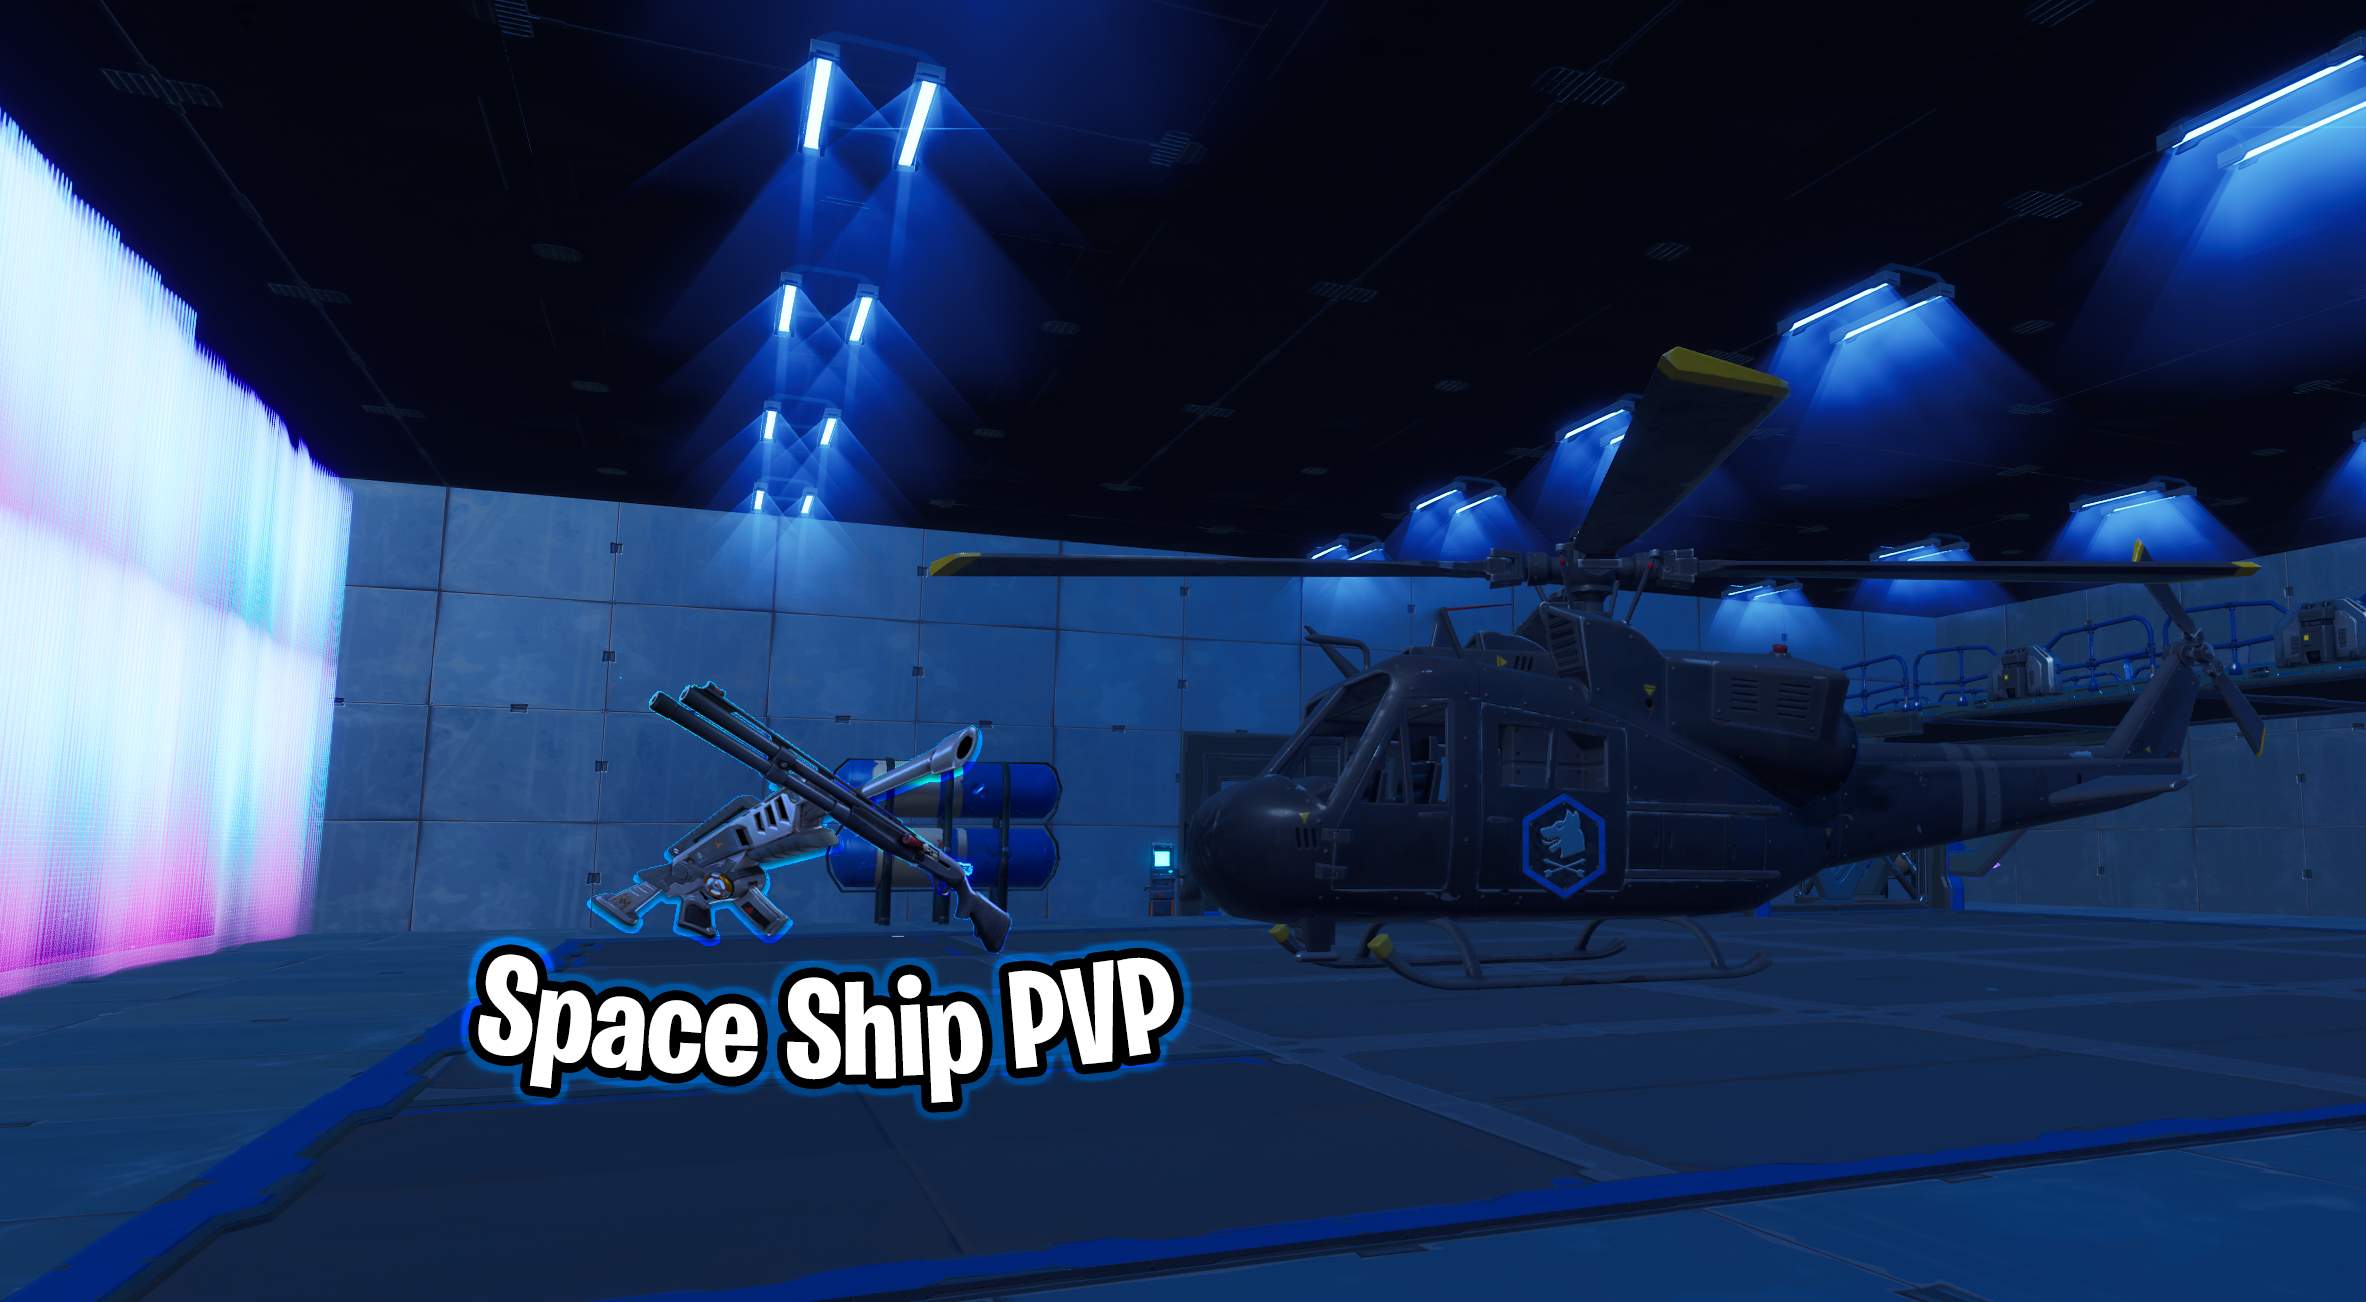 SPACE SHIP PVP image 2